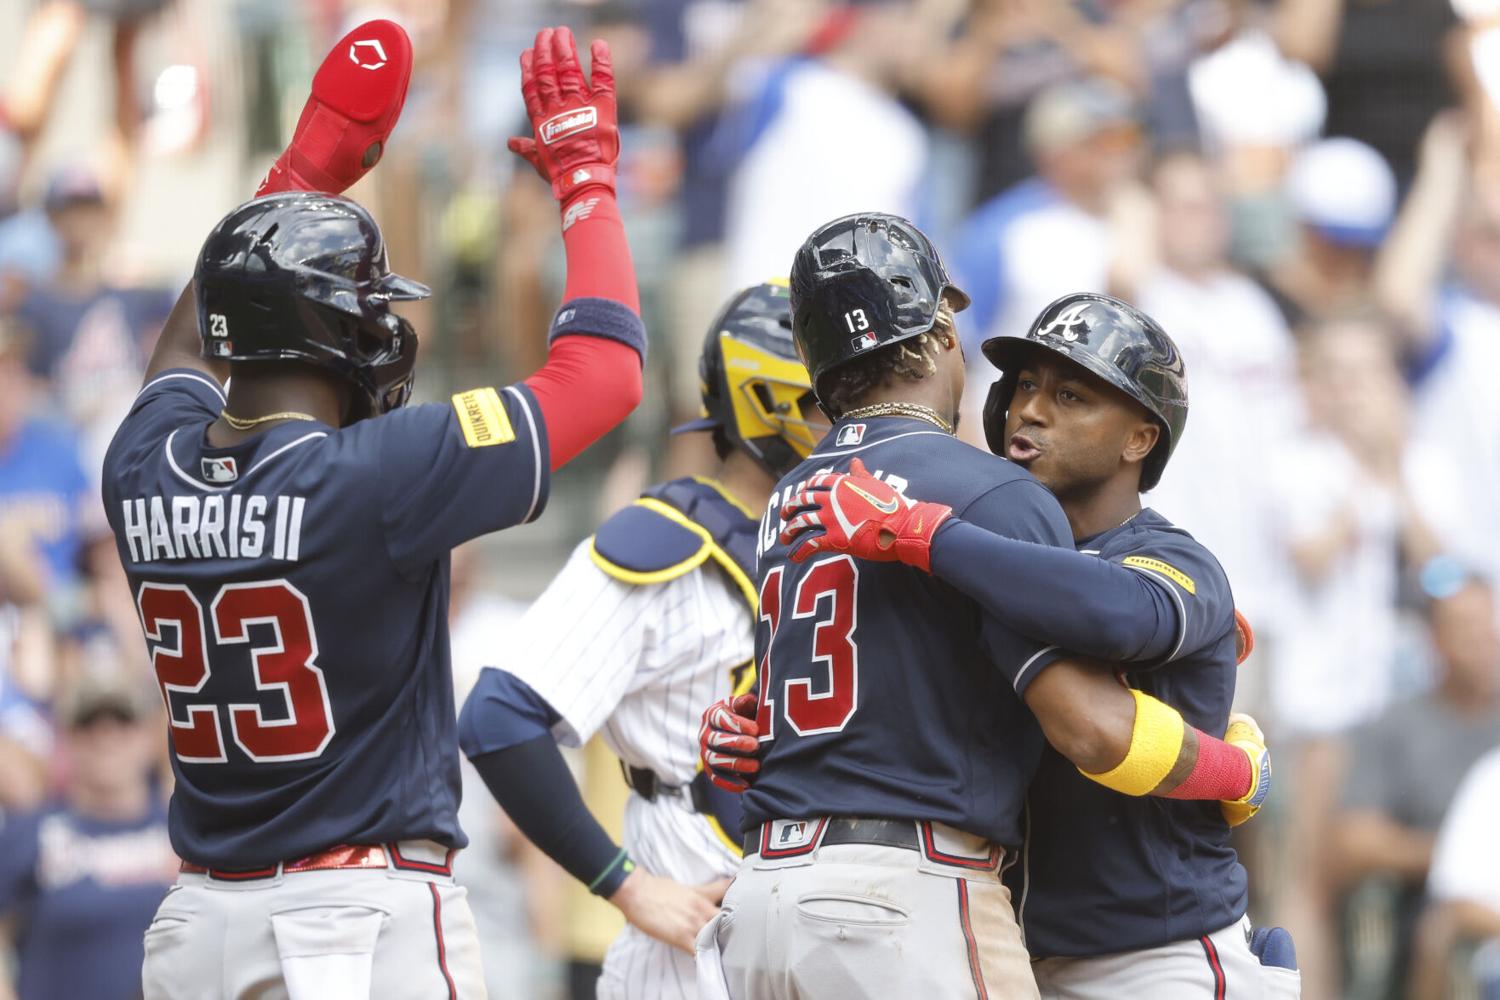 Braves wear new uniforms against Brewers